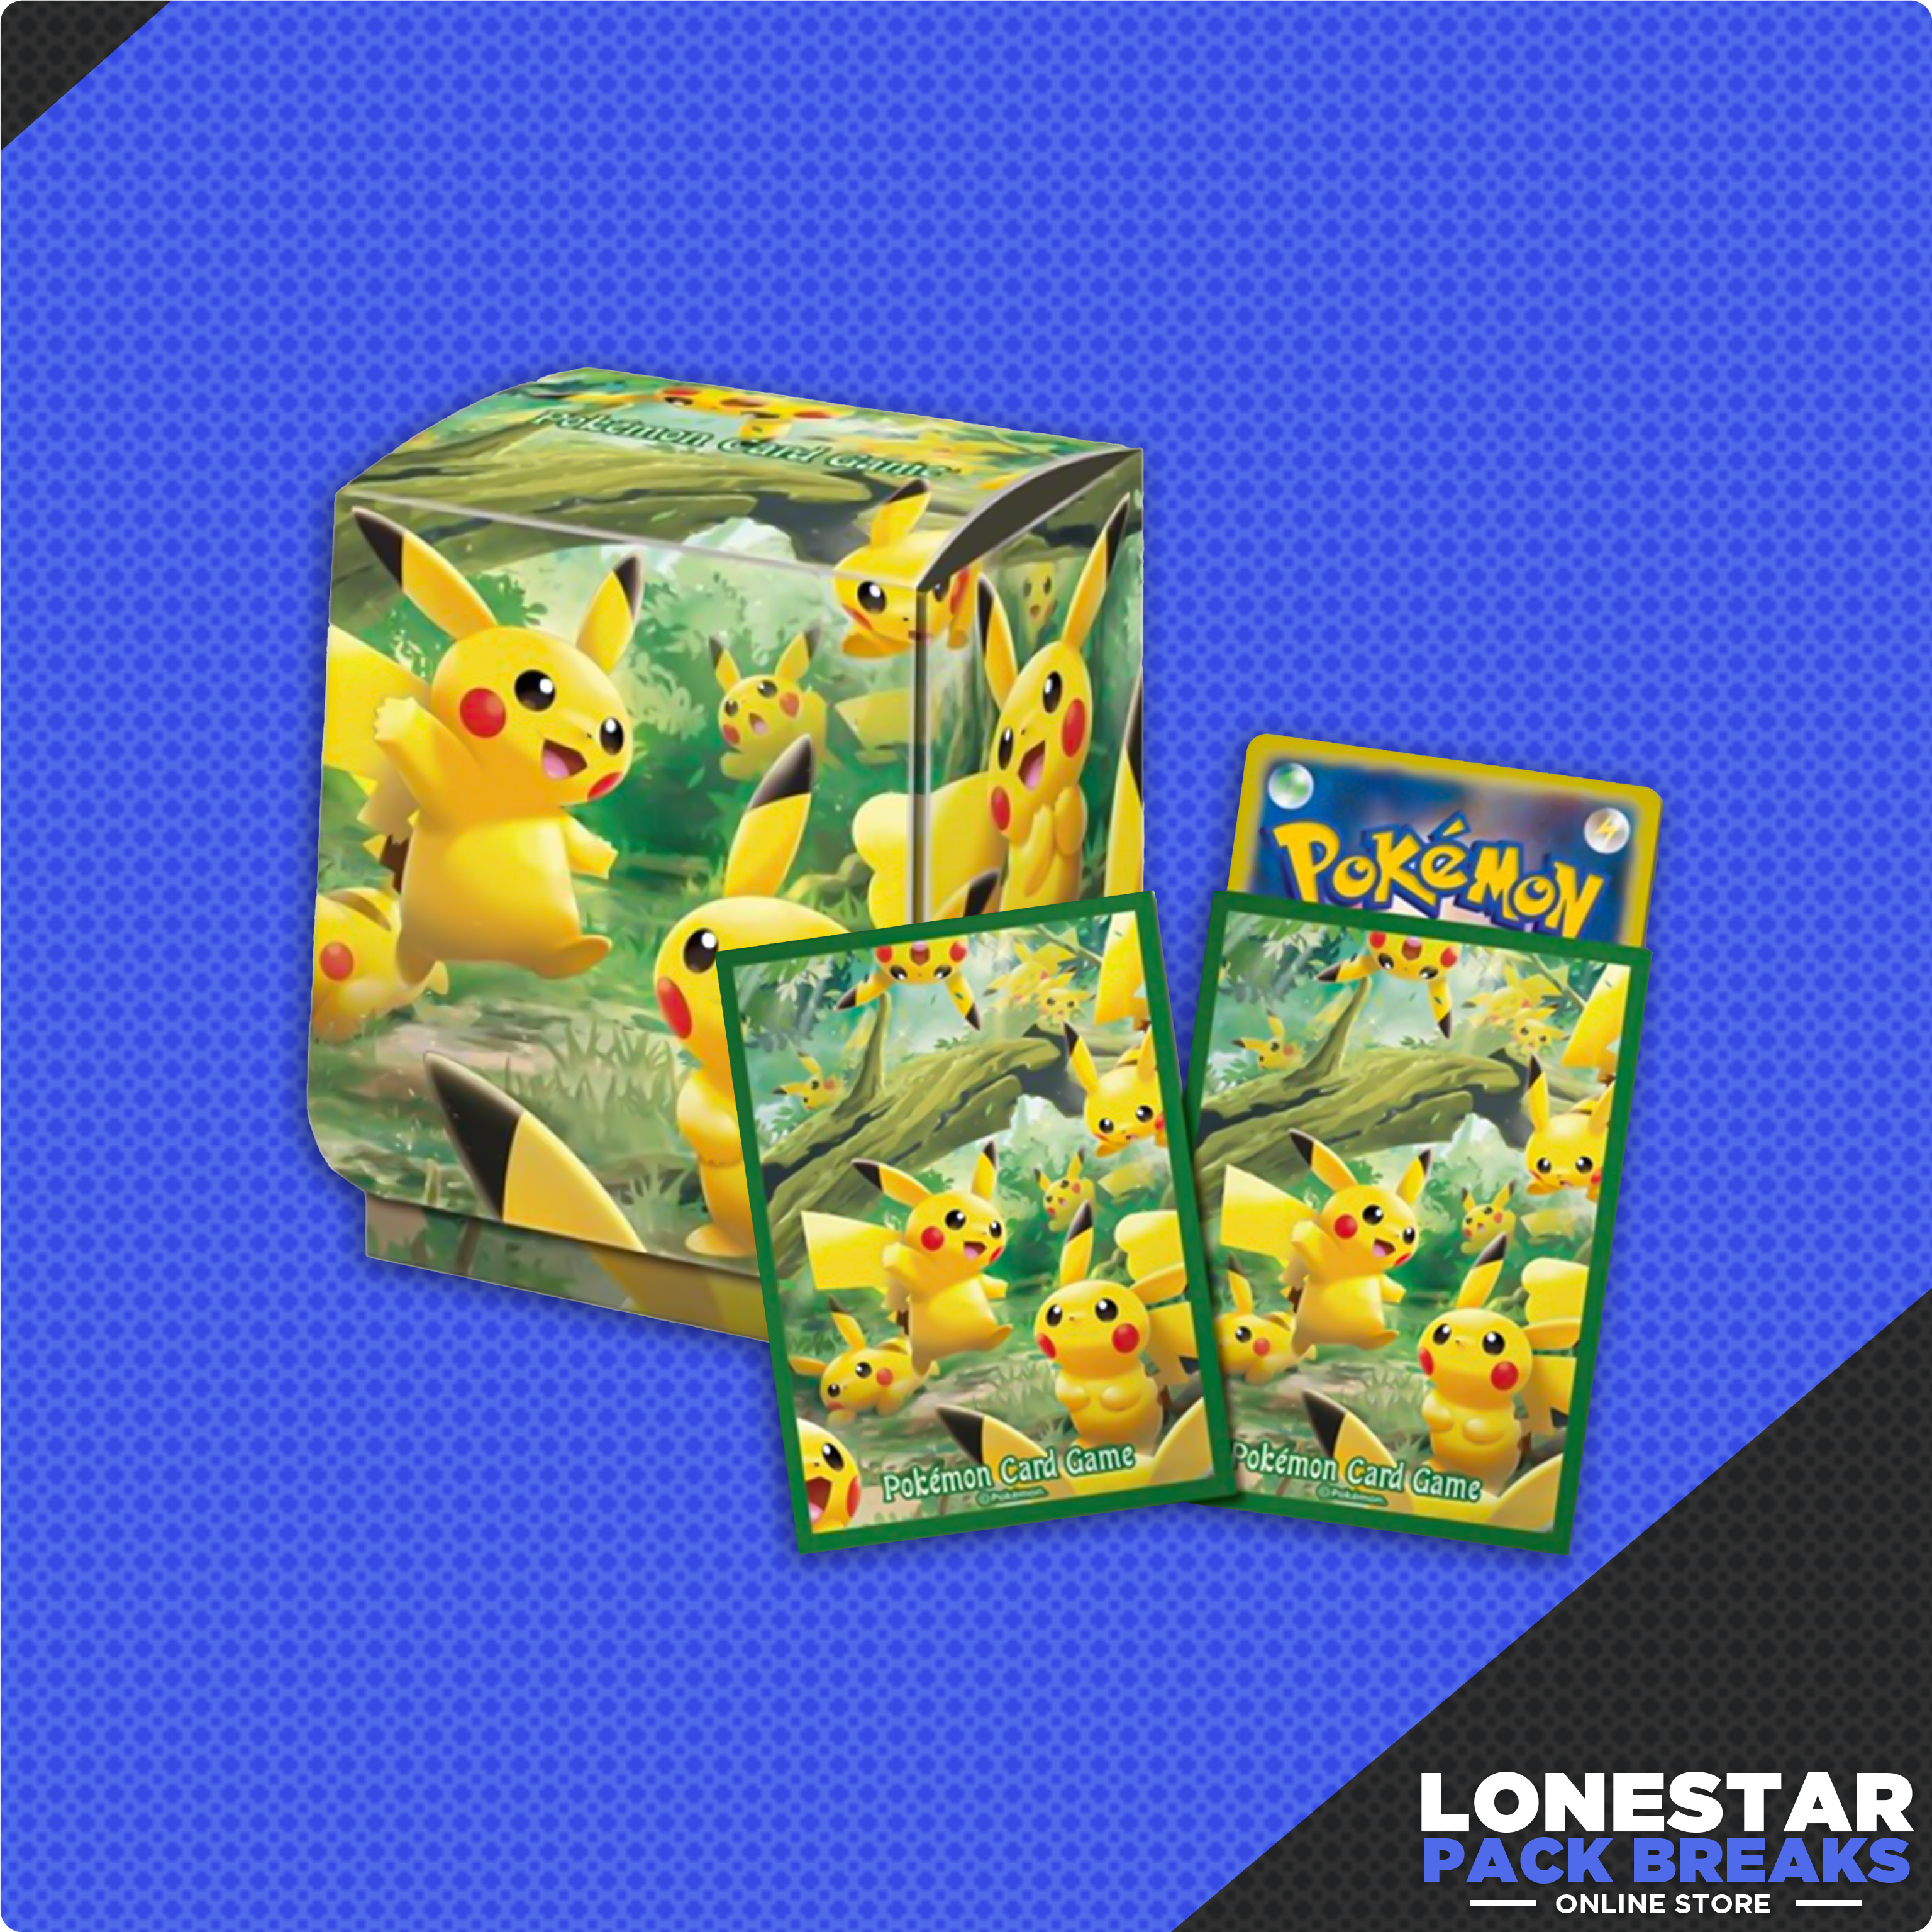 Pikachu Forest Pokemon Center Japan Sleeves and Deck Box Combo